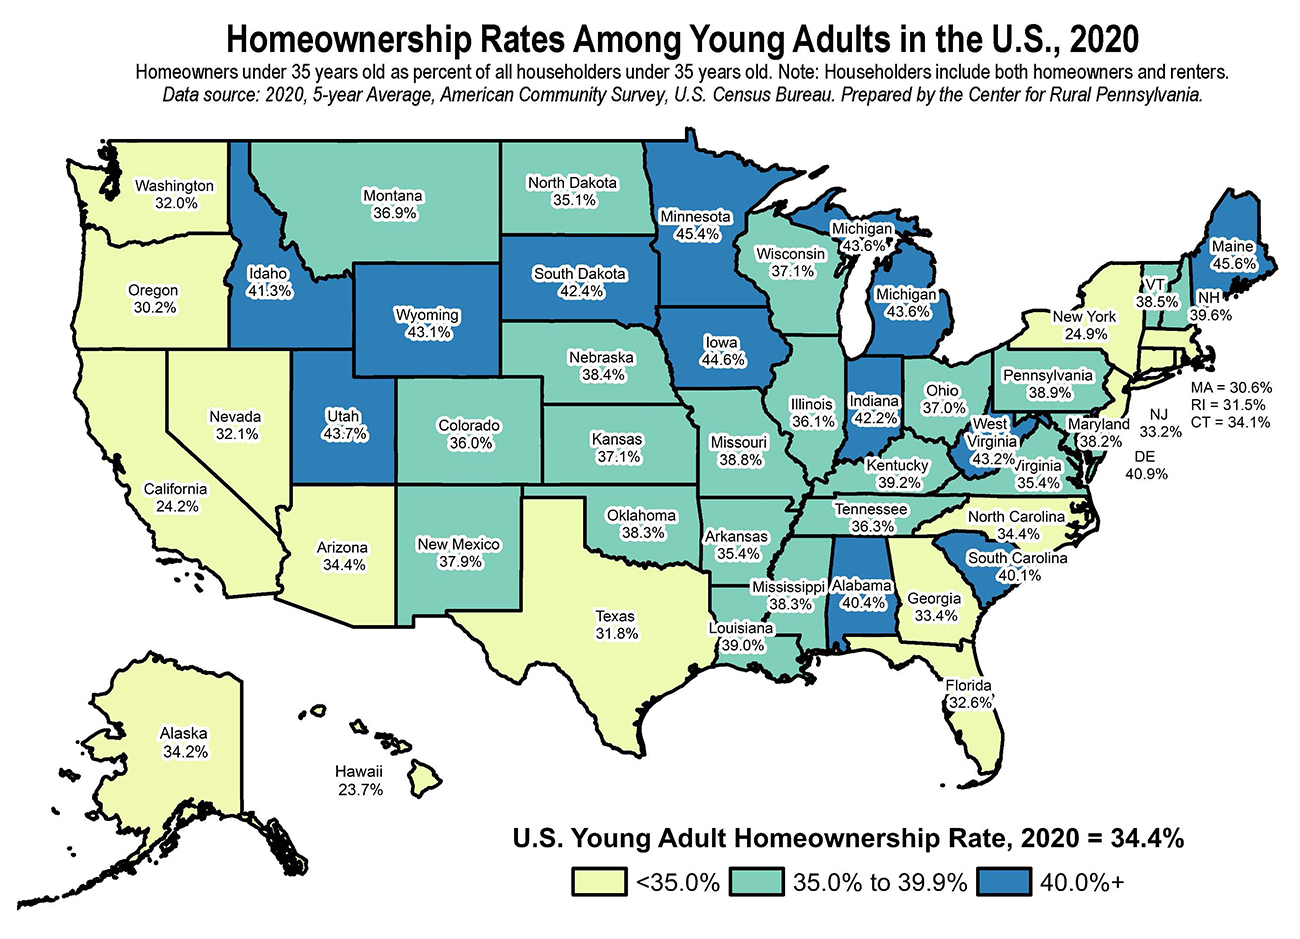 Map showing young adult homeownership rates in the U.S. for 2020